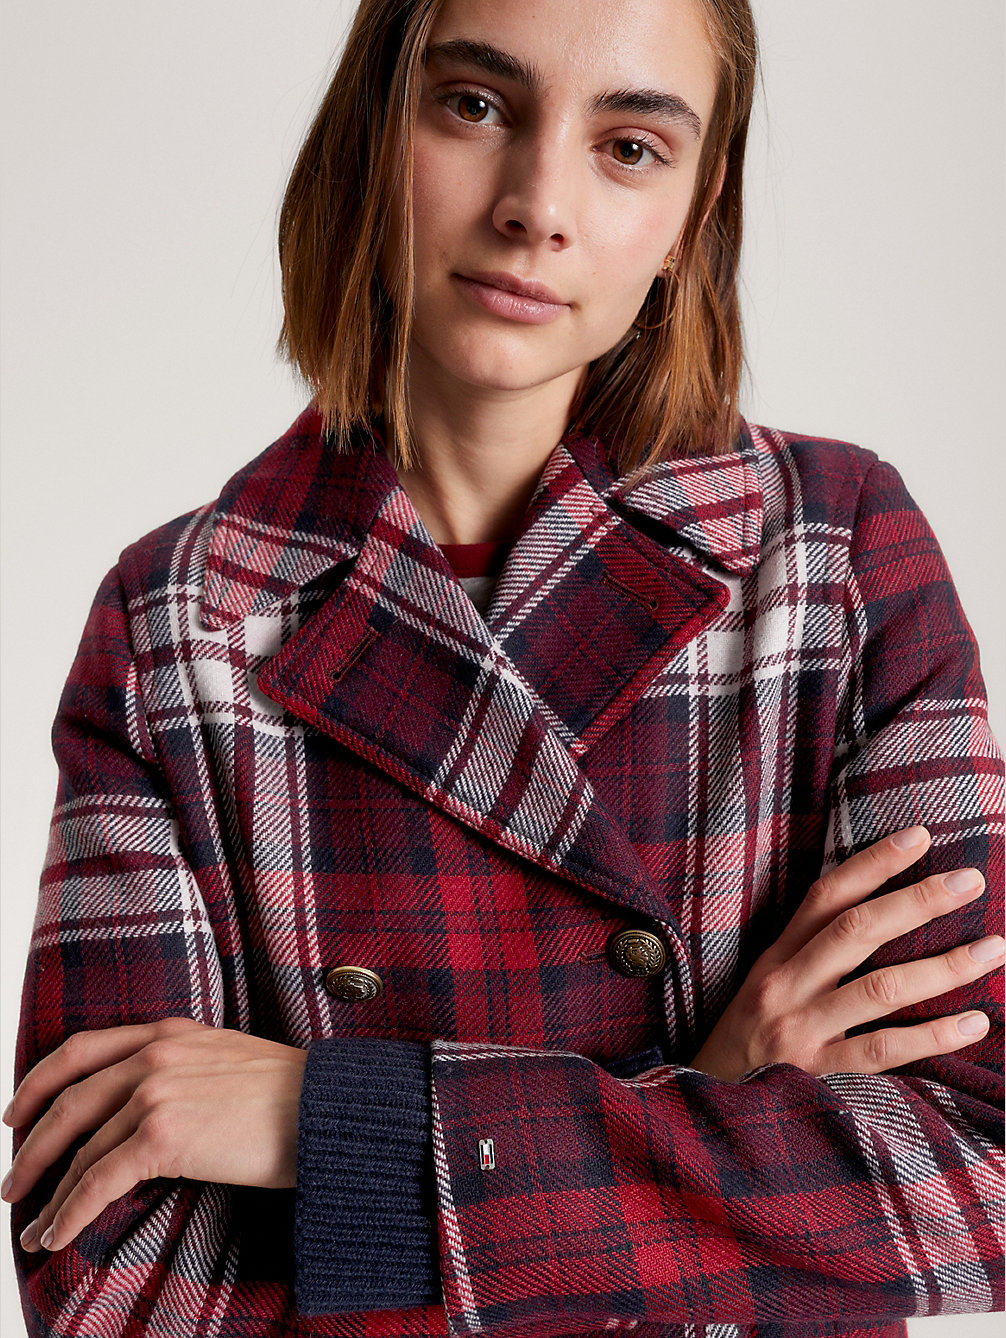 red prep tartan check double breasted peacoat for women tommy hilfiger